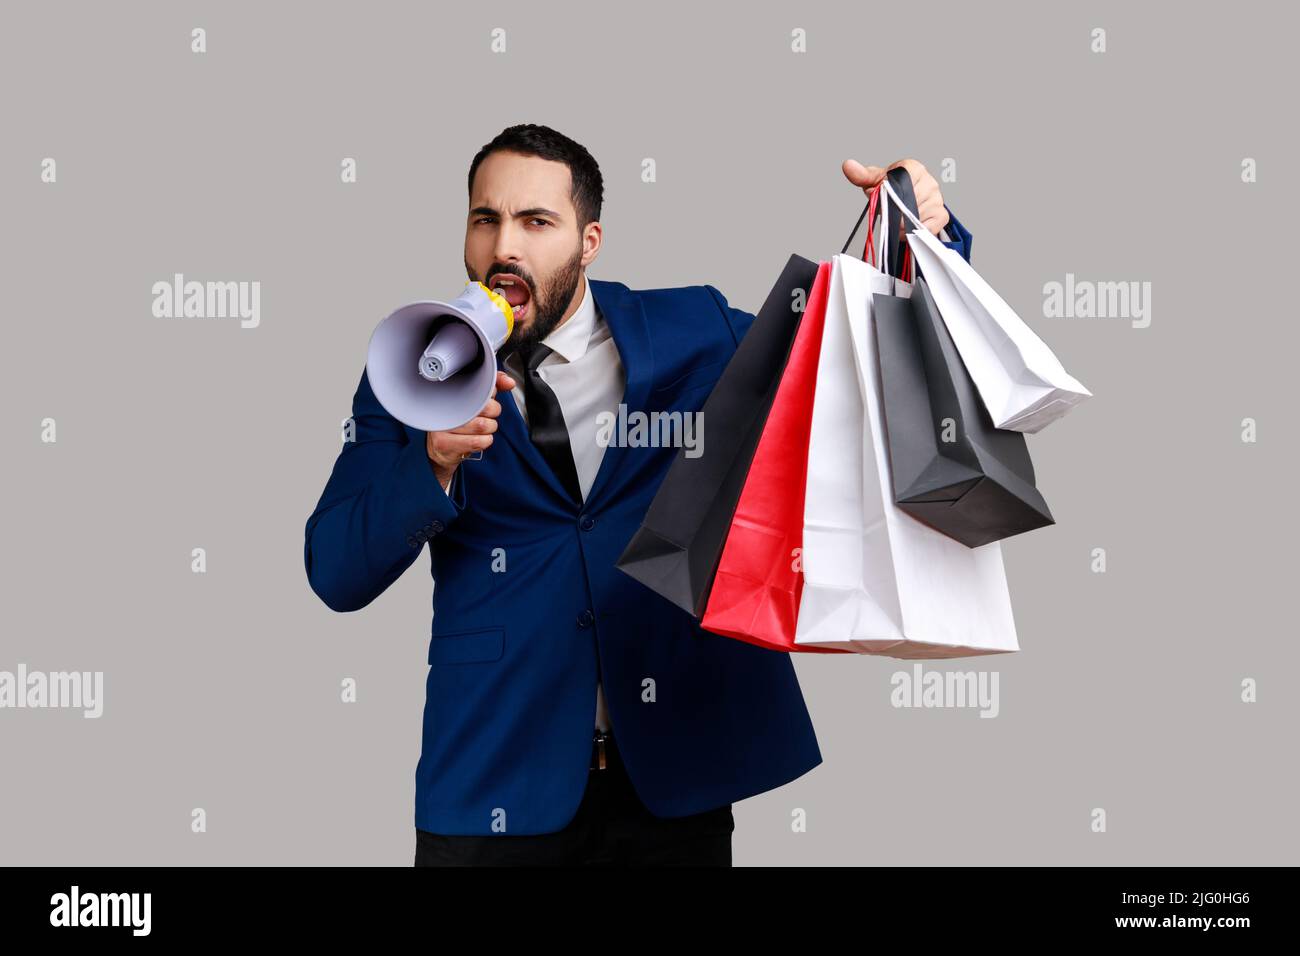 Bearded man announcing shopping discounts and sale, holding shopping bags with purchases, screams in loud speaker, wearing official style suit. Indoor studio shot isolated on gray background. Stock Photo